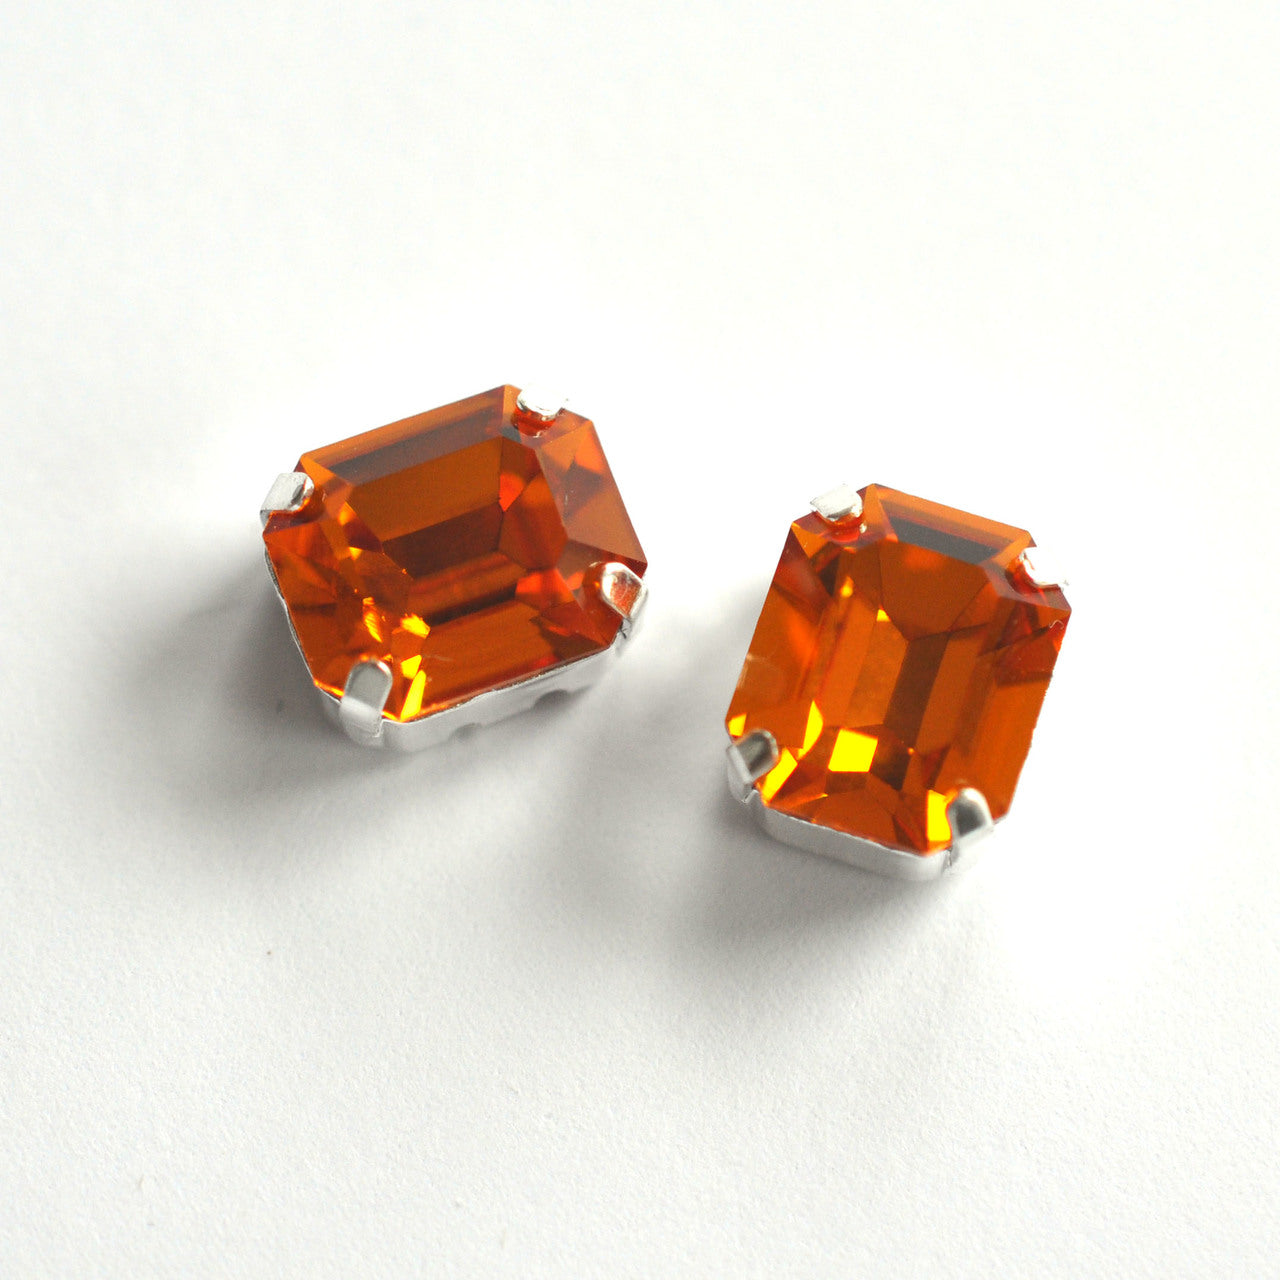 Topaz 12x10mm Octagon Sew On Crystals - 2 Pieces